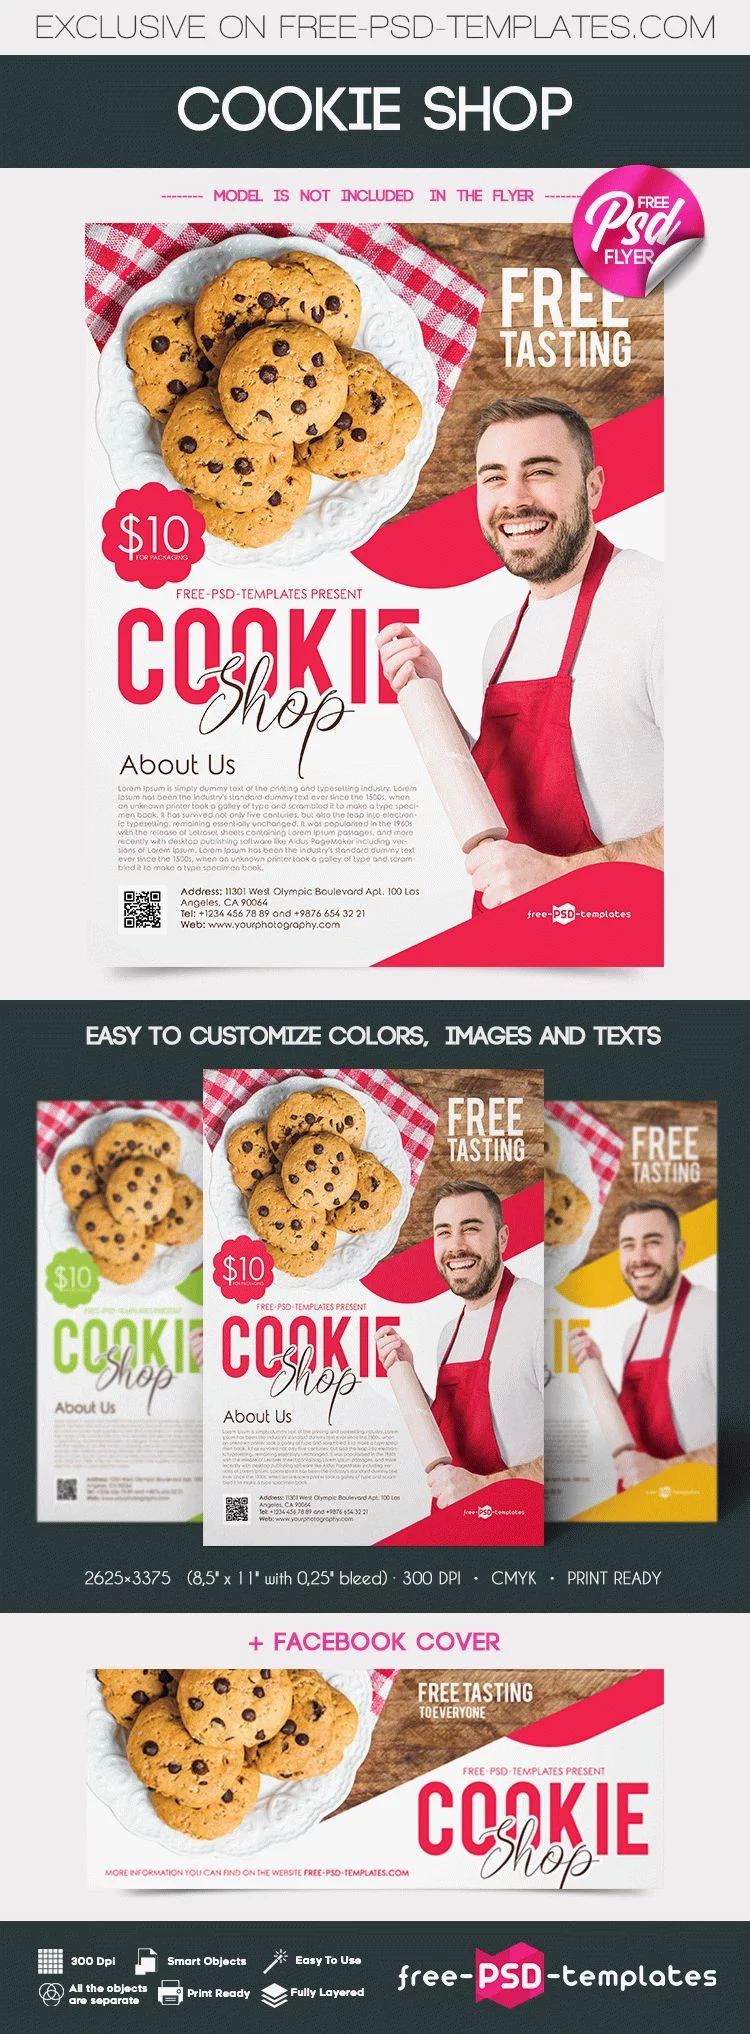 Free Cookie Shop Flyer in PSD